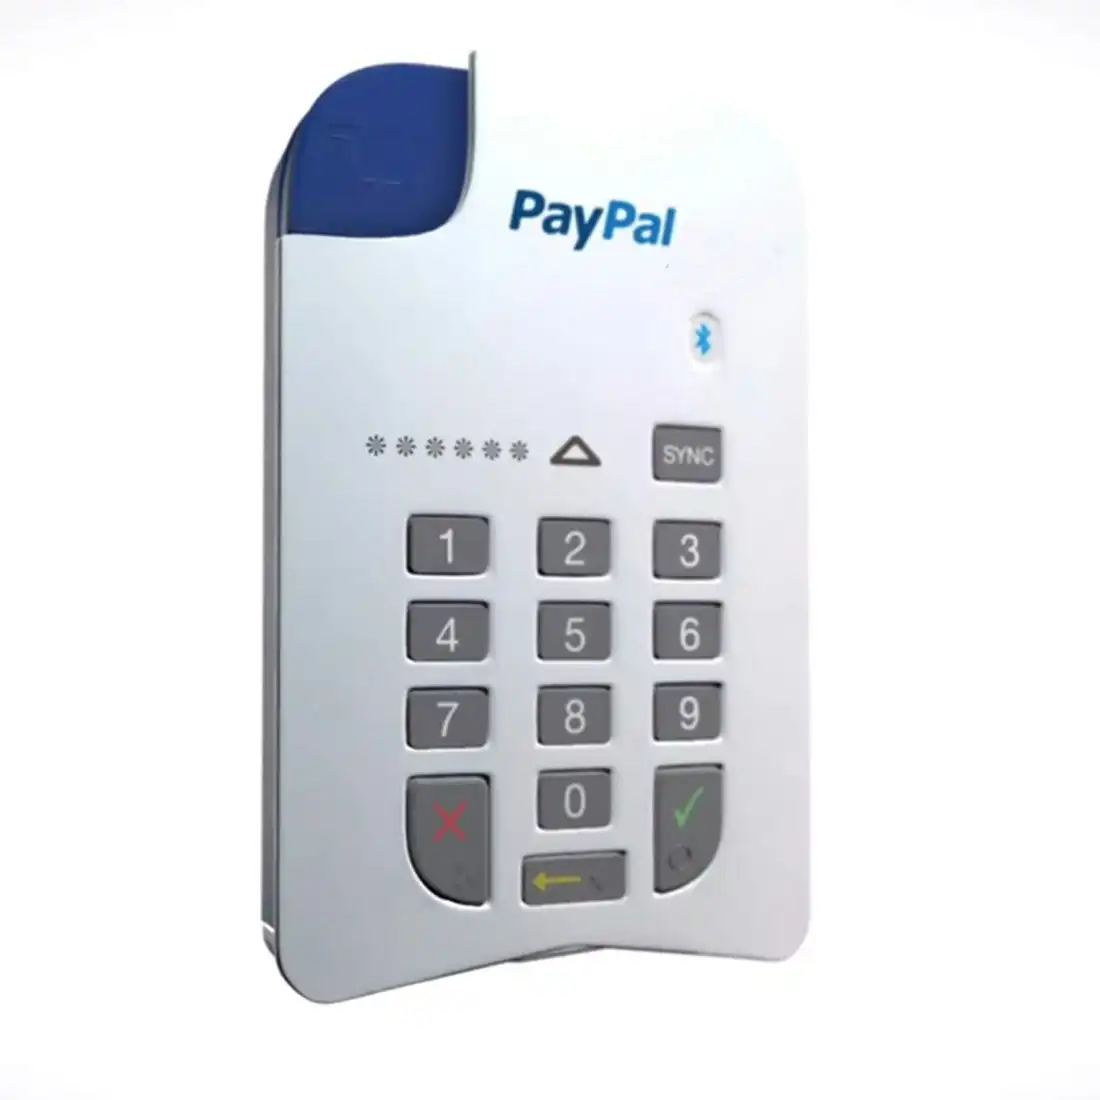 Paypal Here Chip and PIN Card Reader - White